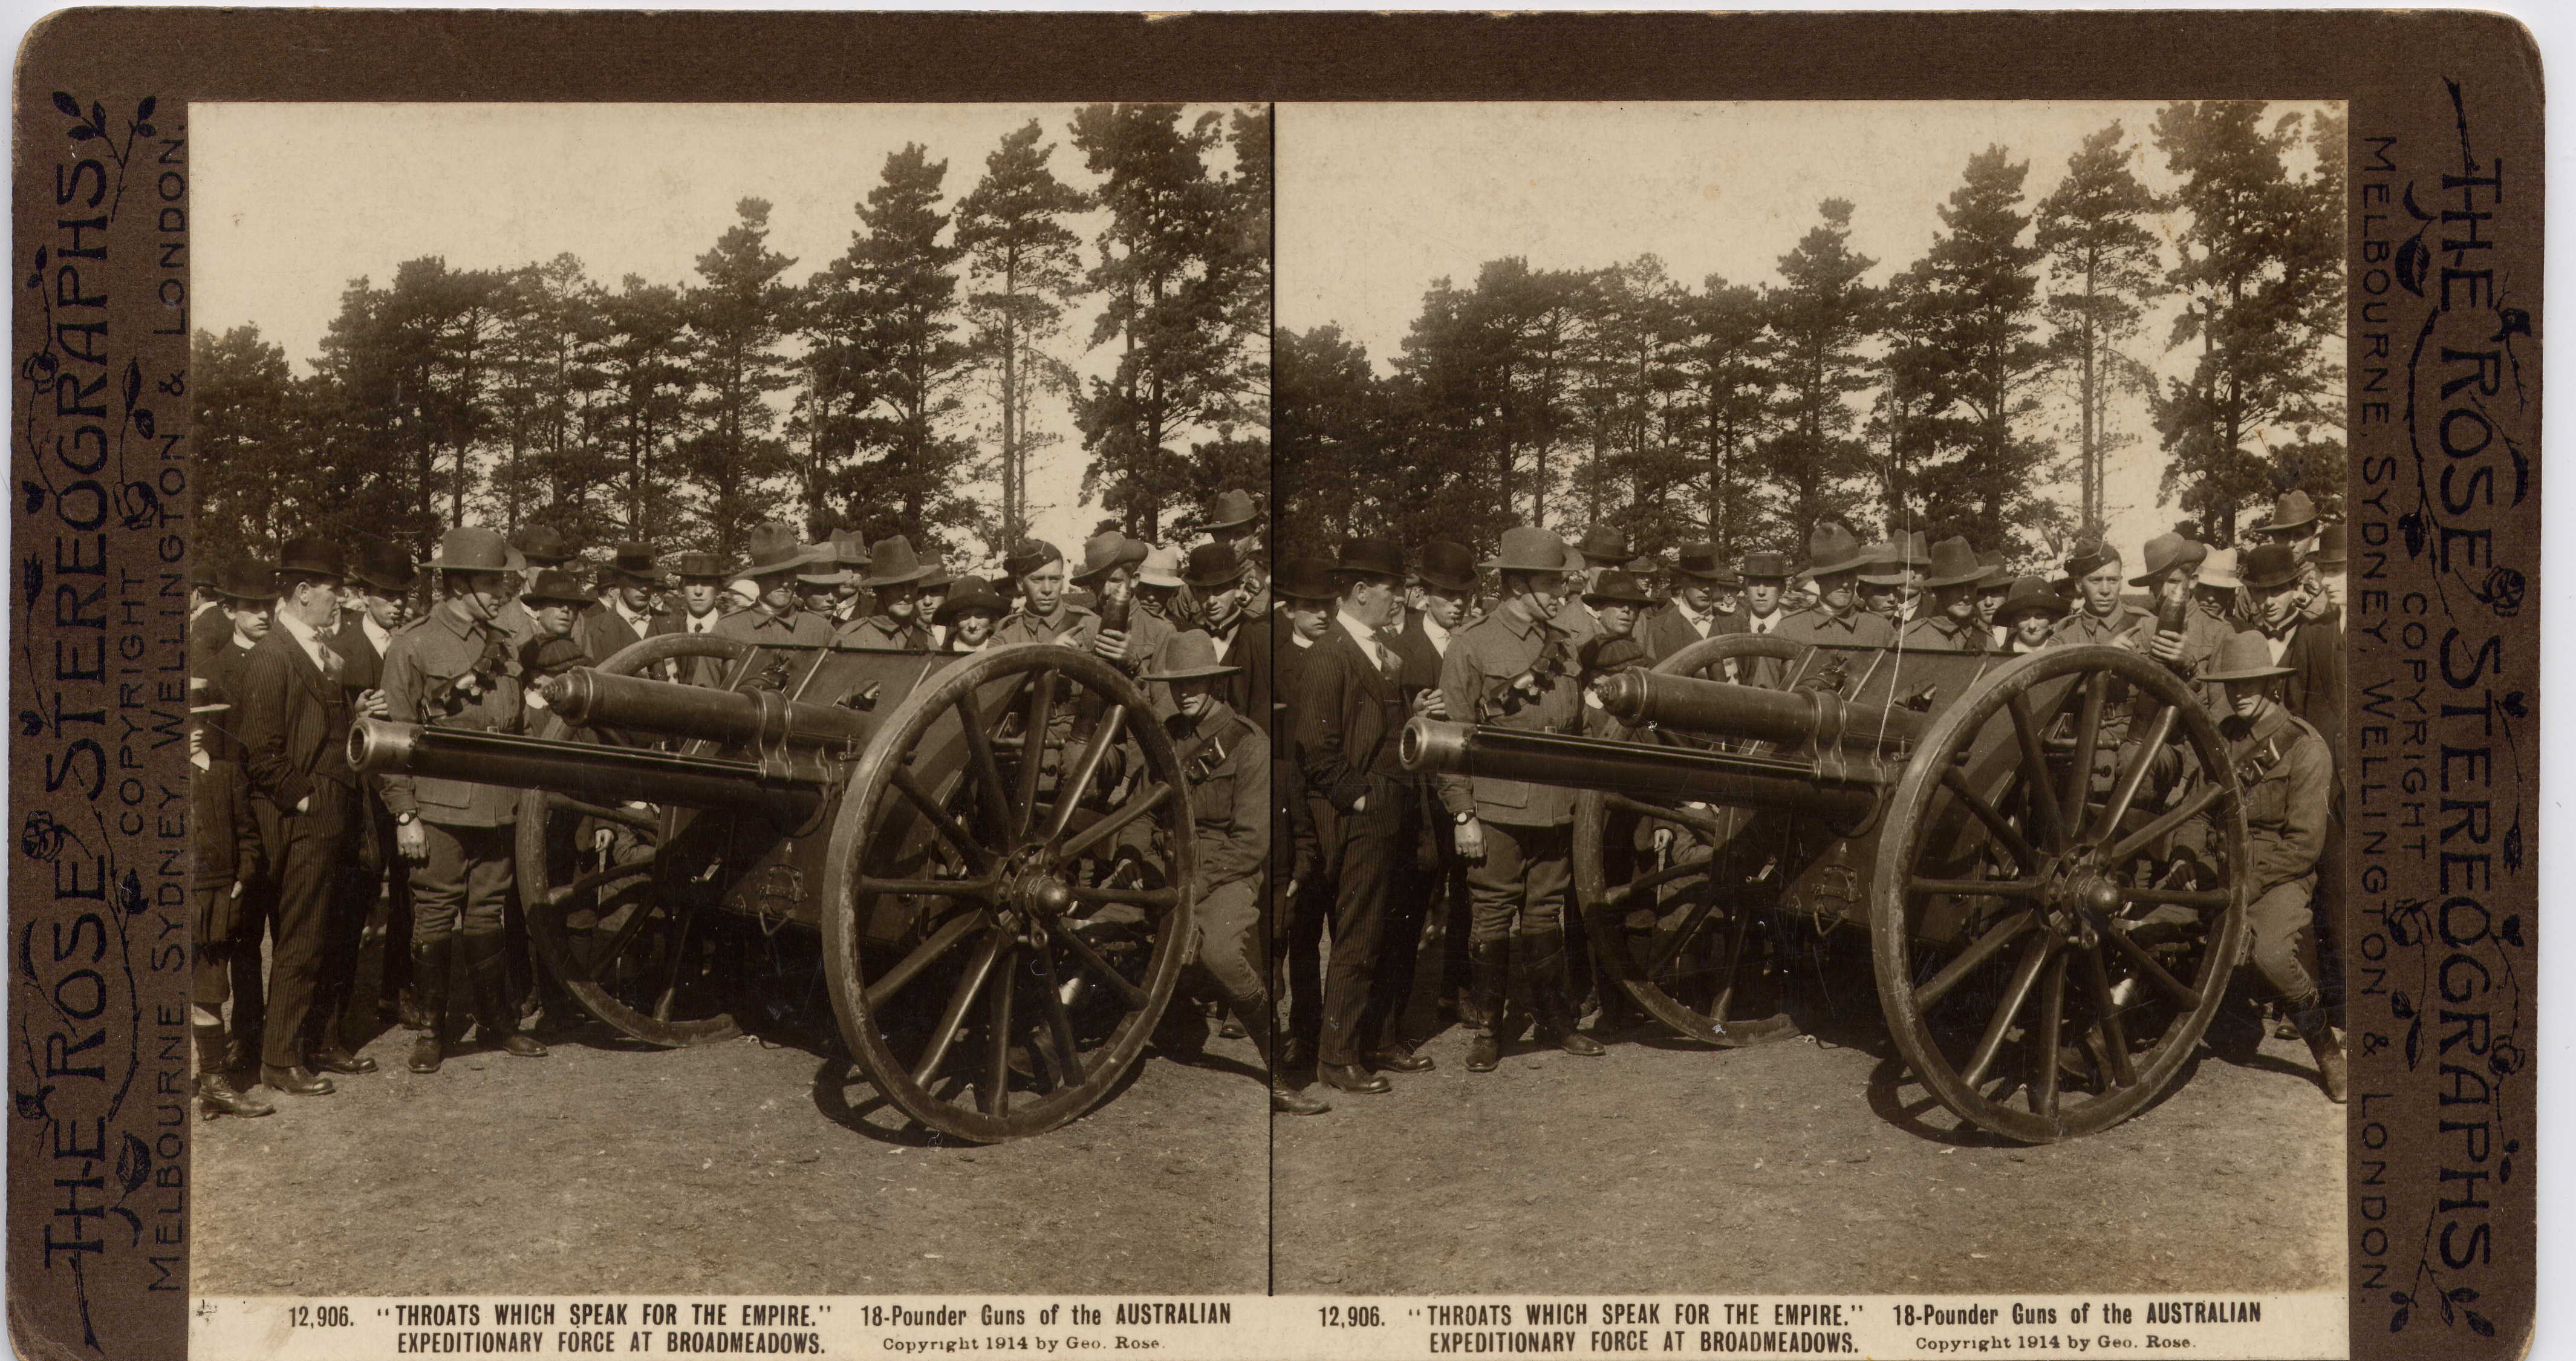 ”THROATS WHICH SPEAK FOR THE EMPIRE.” 18-Pounder Guns of the Australian Expeditionary Force at Broadmeadows.